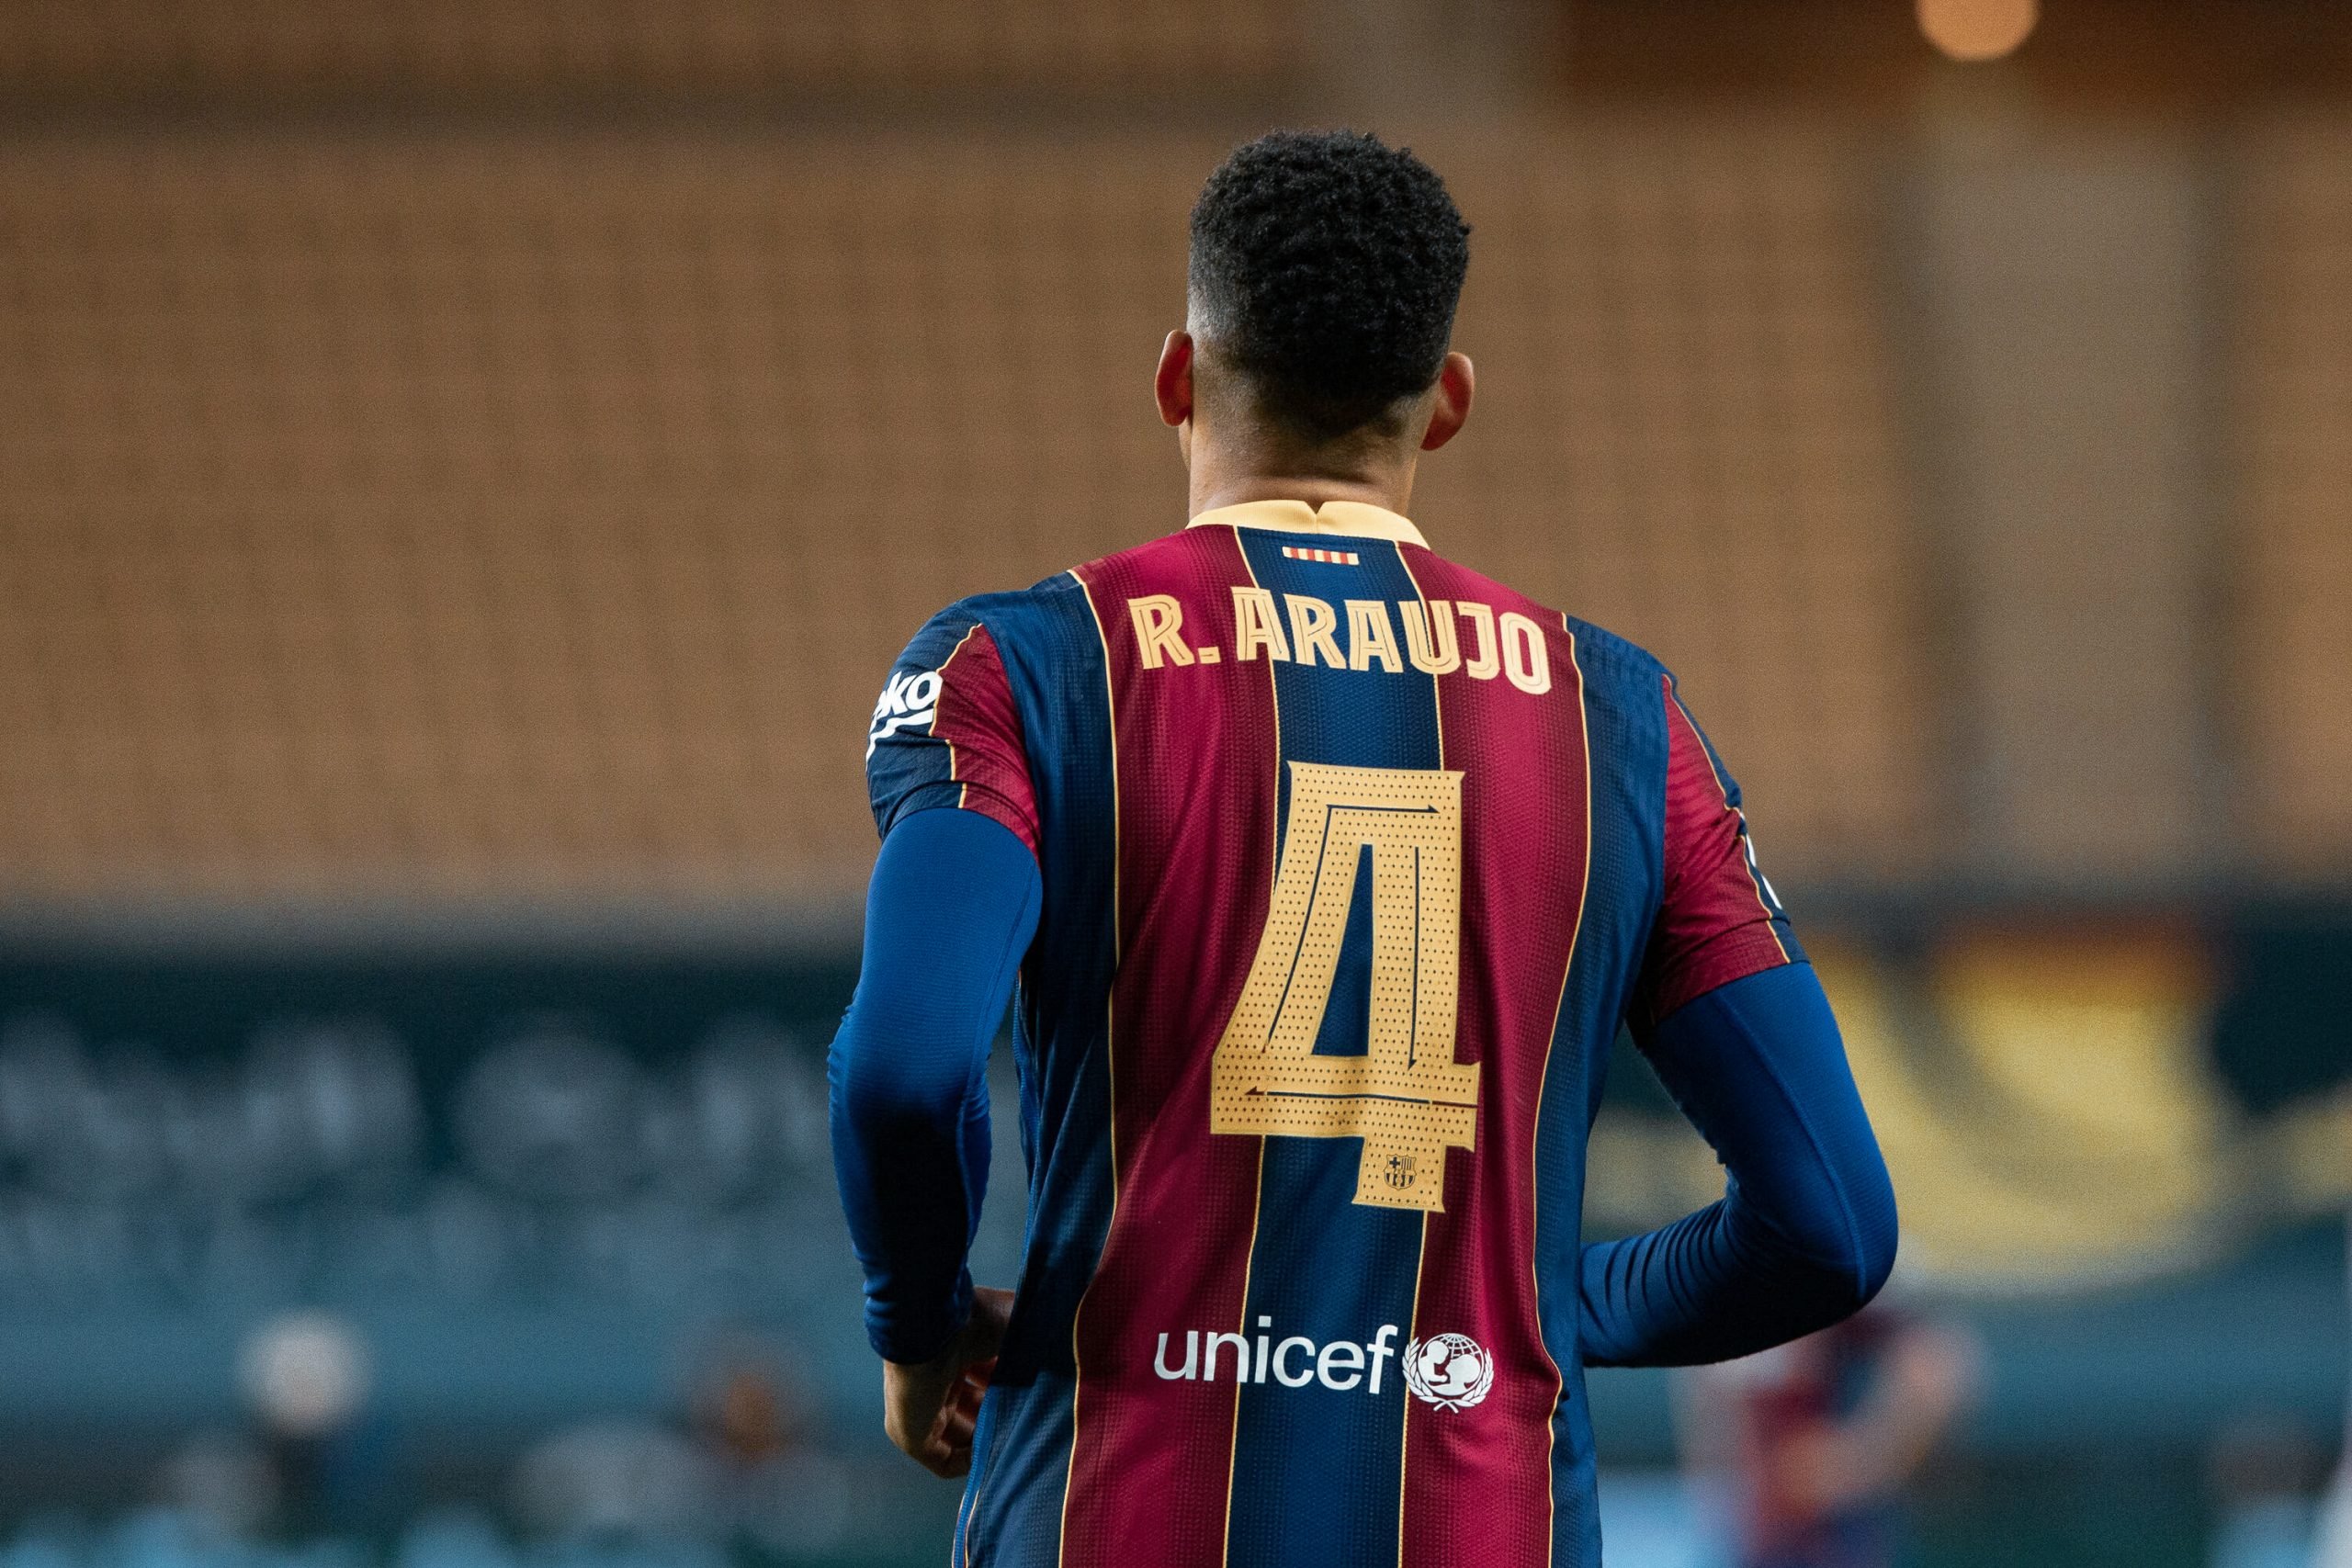 Ronald Araujo signed a new contract with Barcelona this summer.